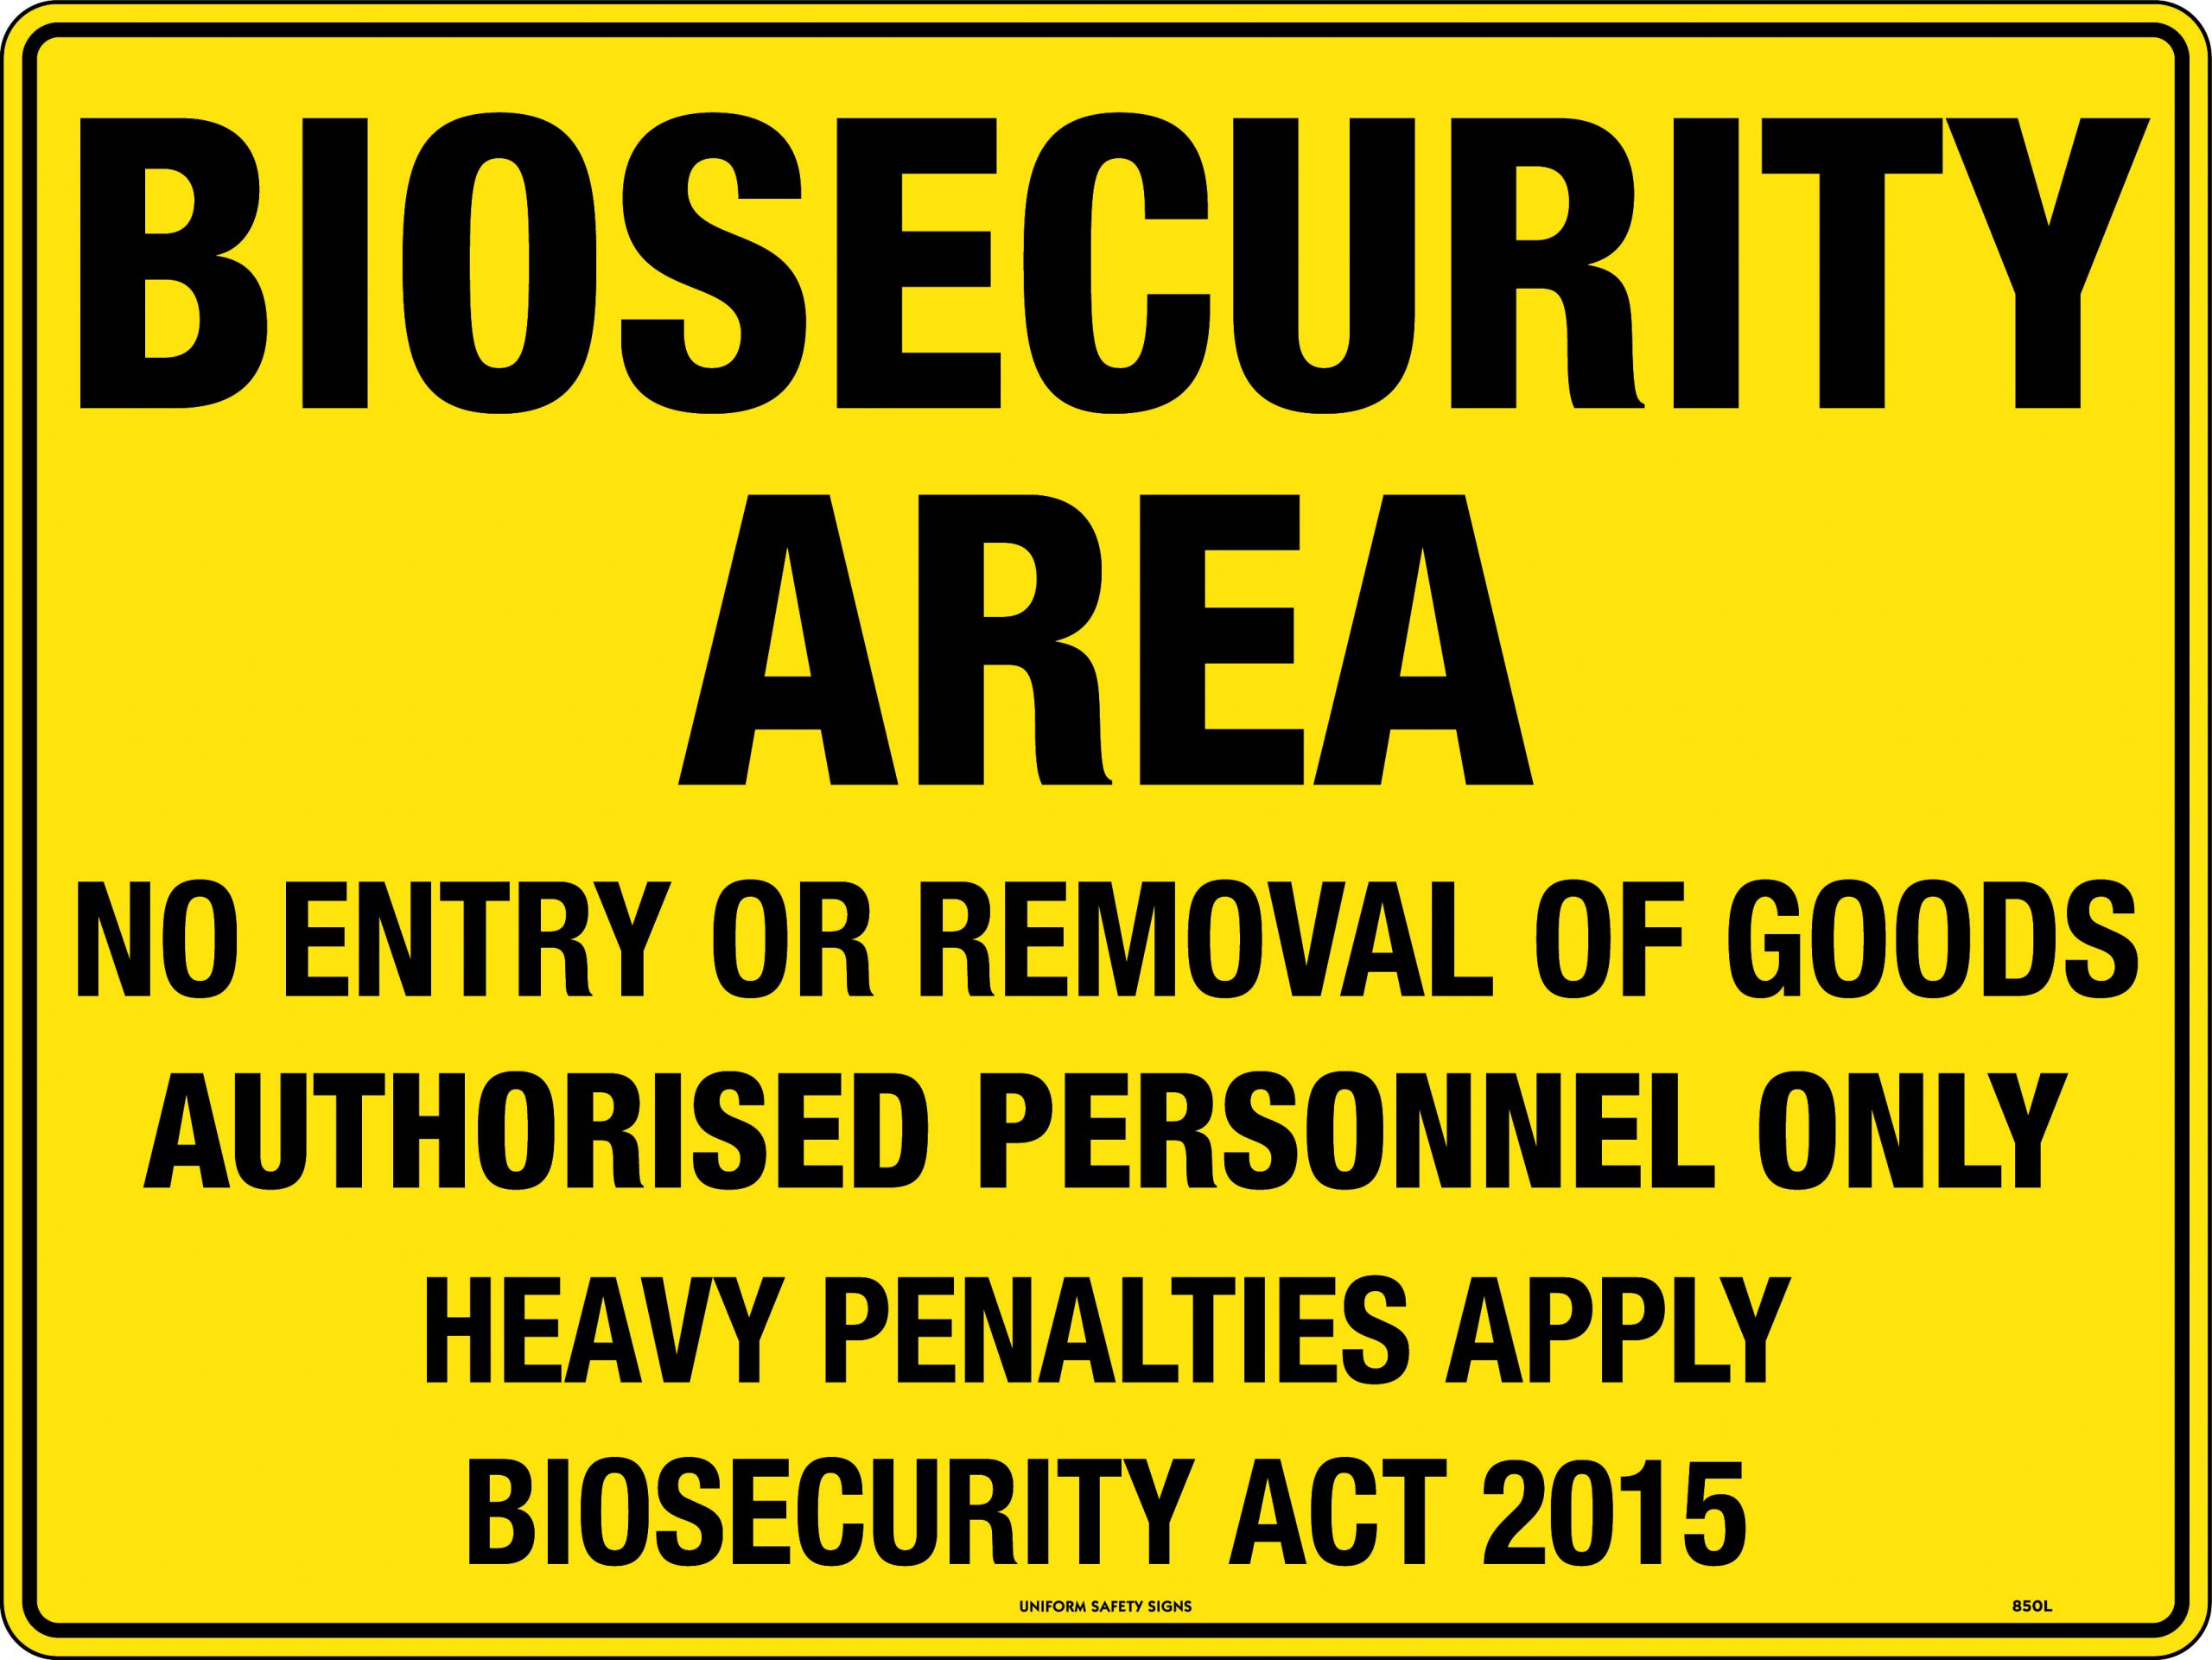 SIGN 600 X 450MM SELF ADHESIVE BIOSECURITY AREA 